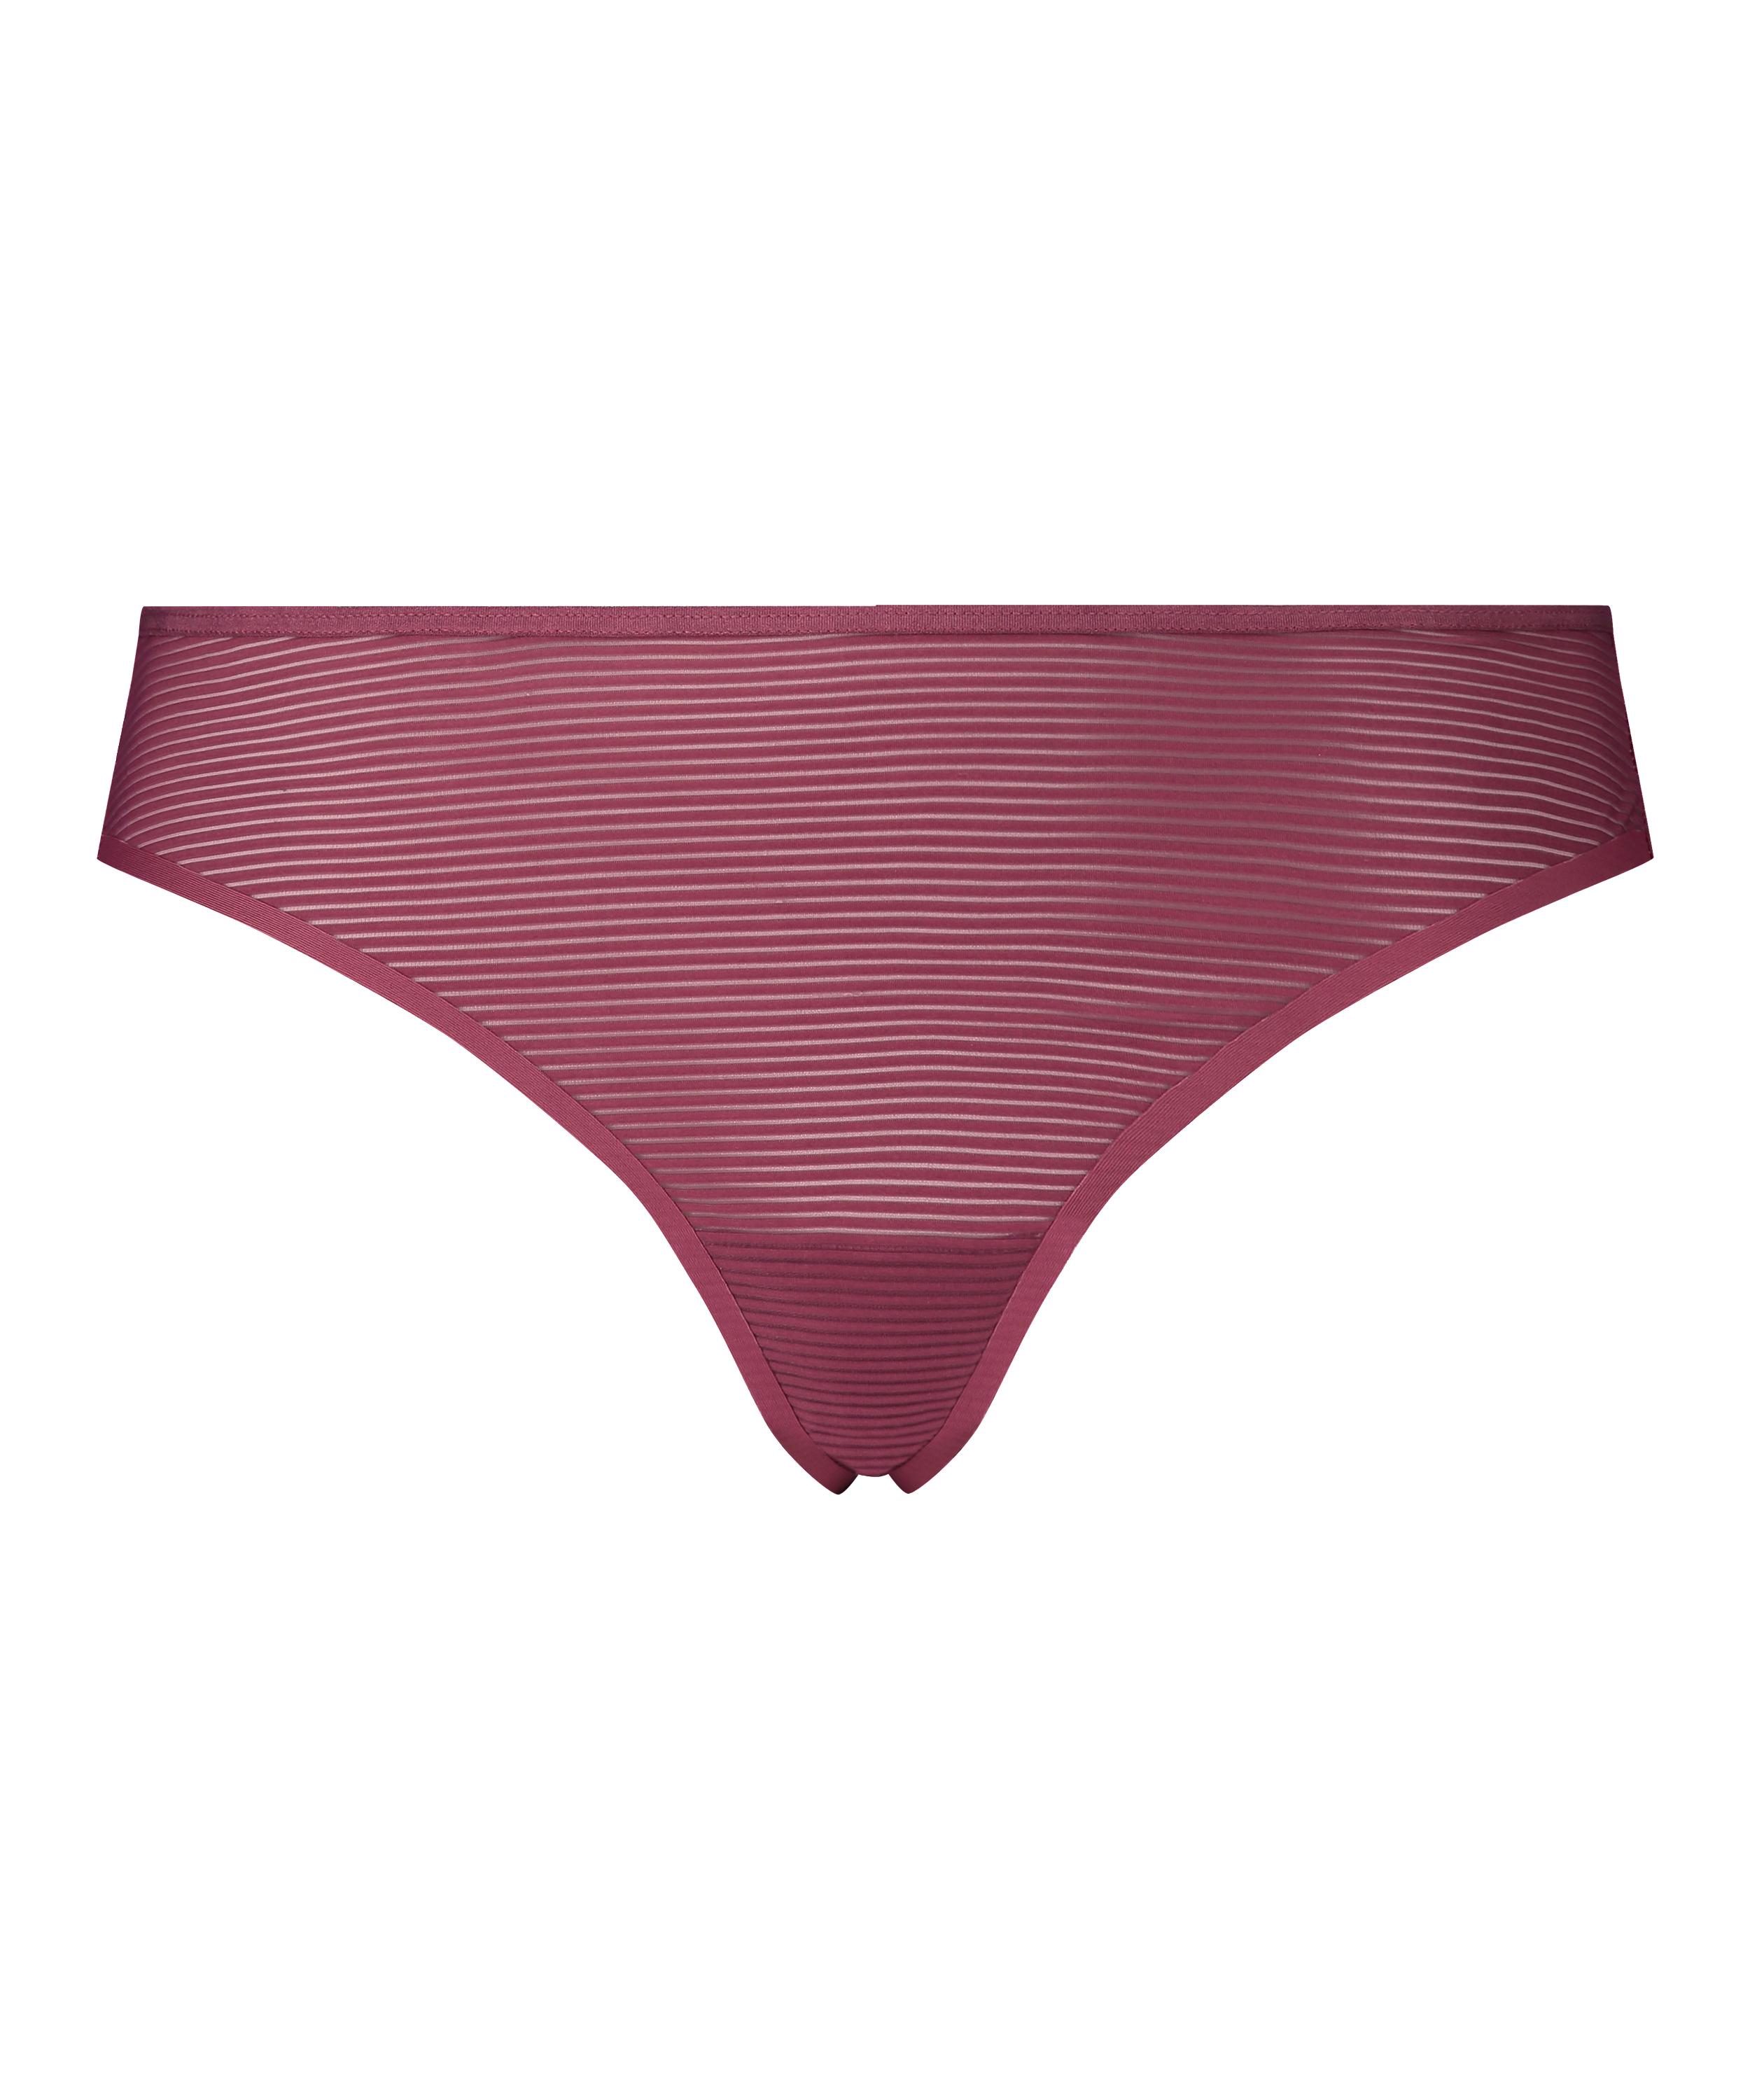 Invisible thong Stripe mesh, Red, main